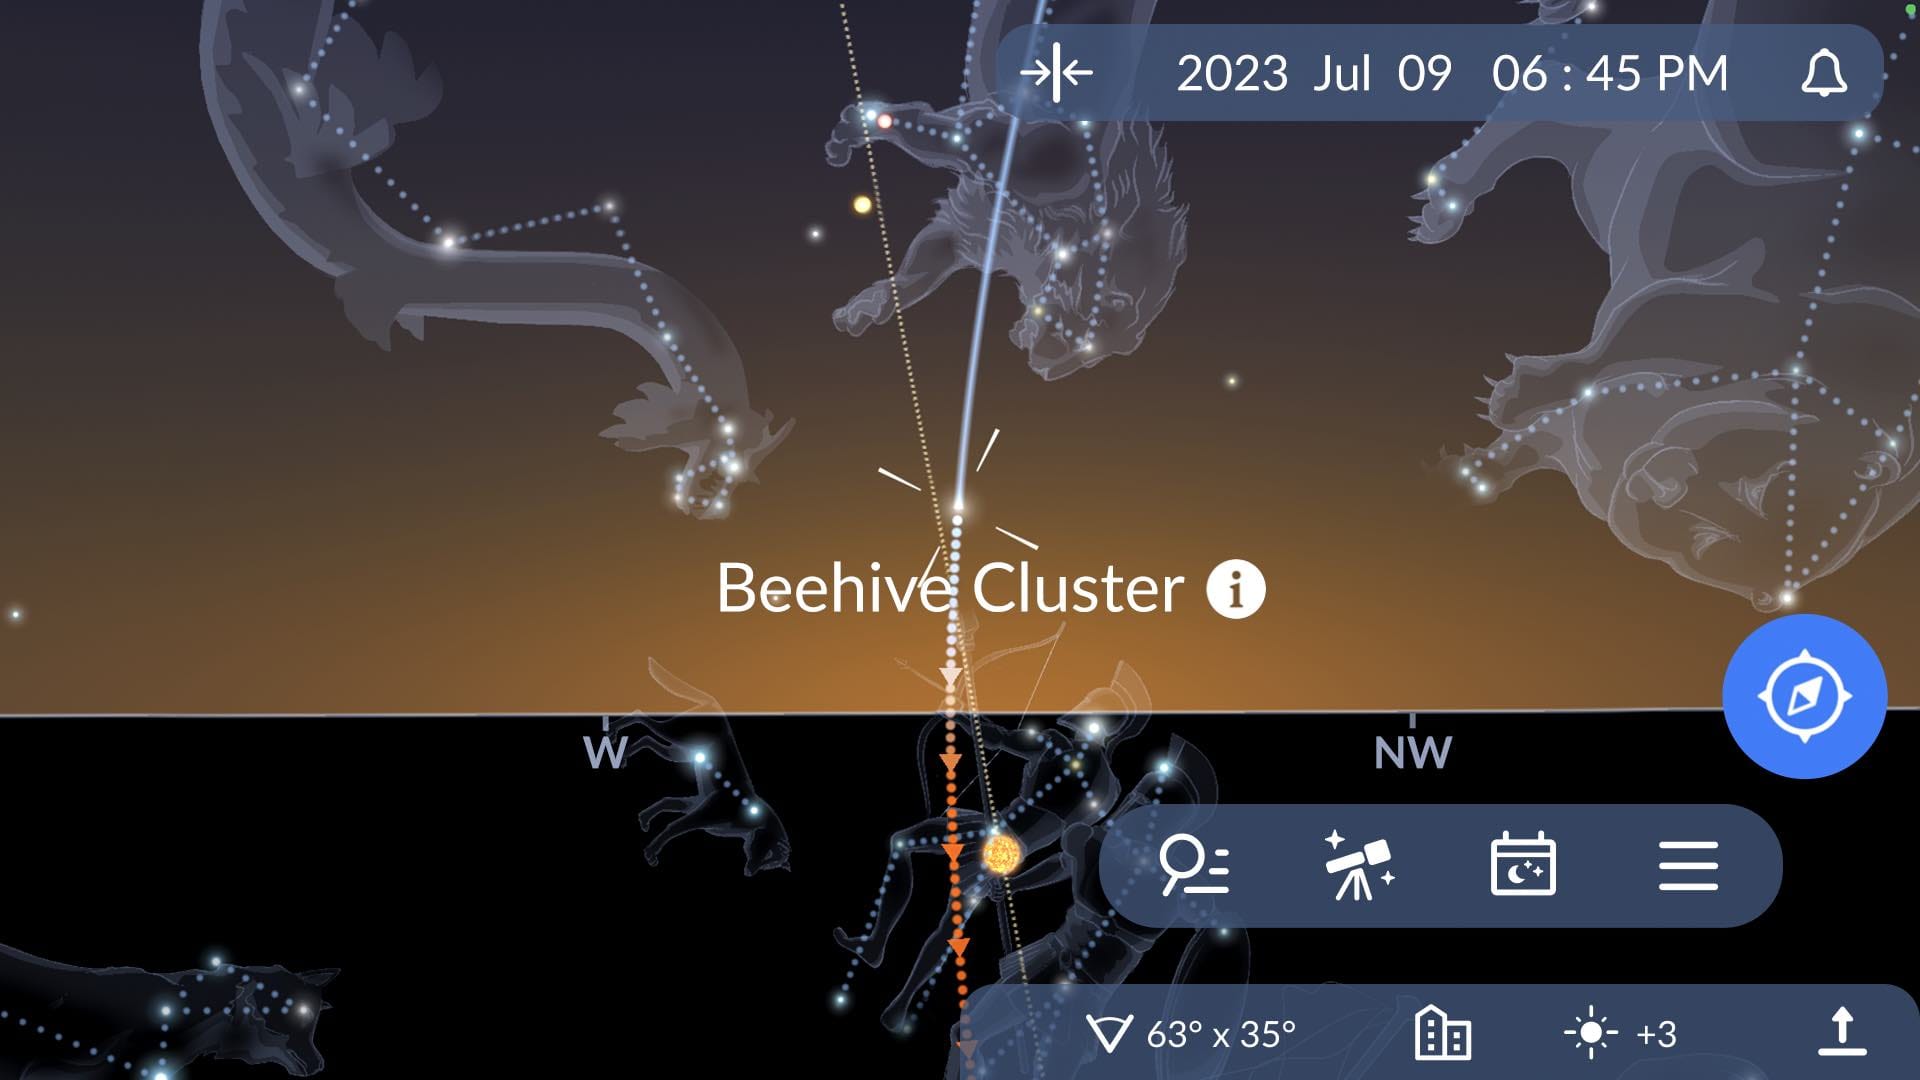 How to find the Beehive Cluster with Sky Tonight